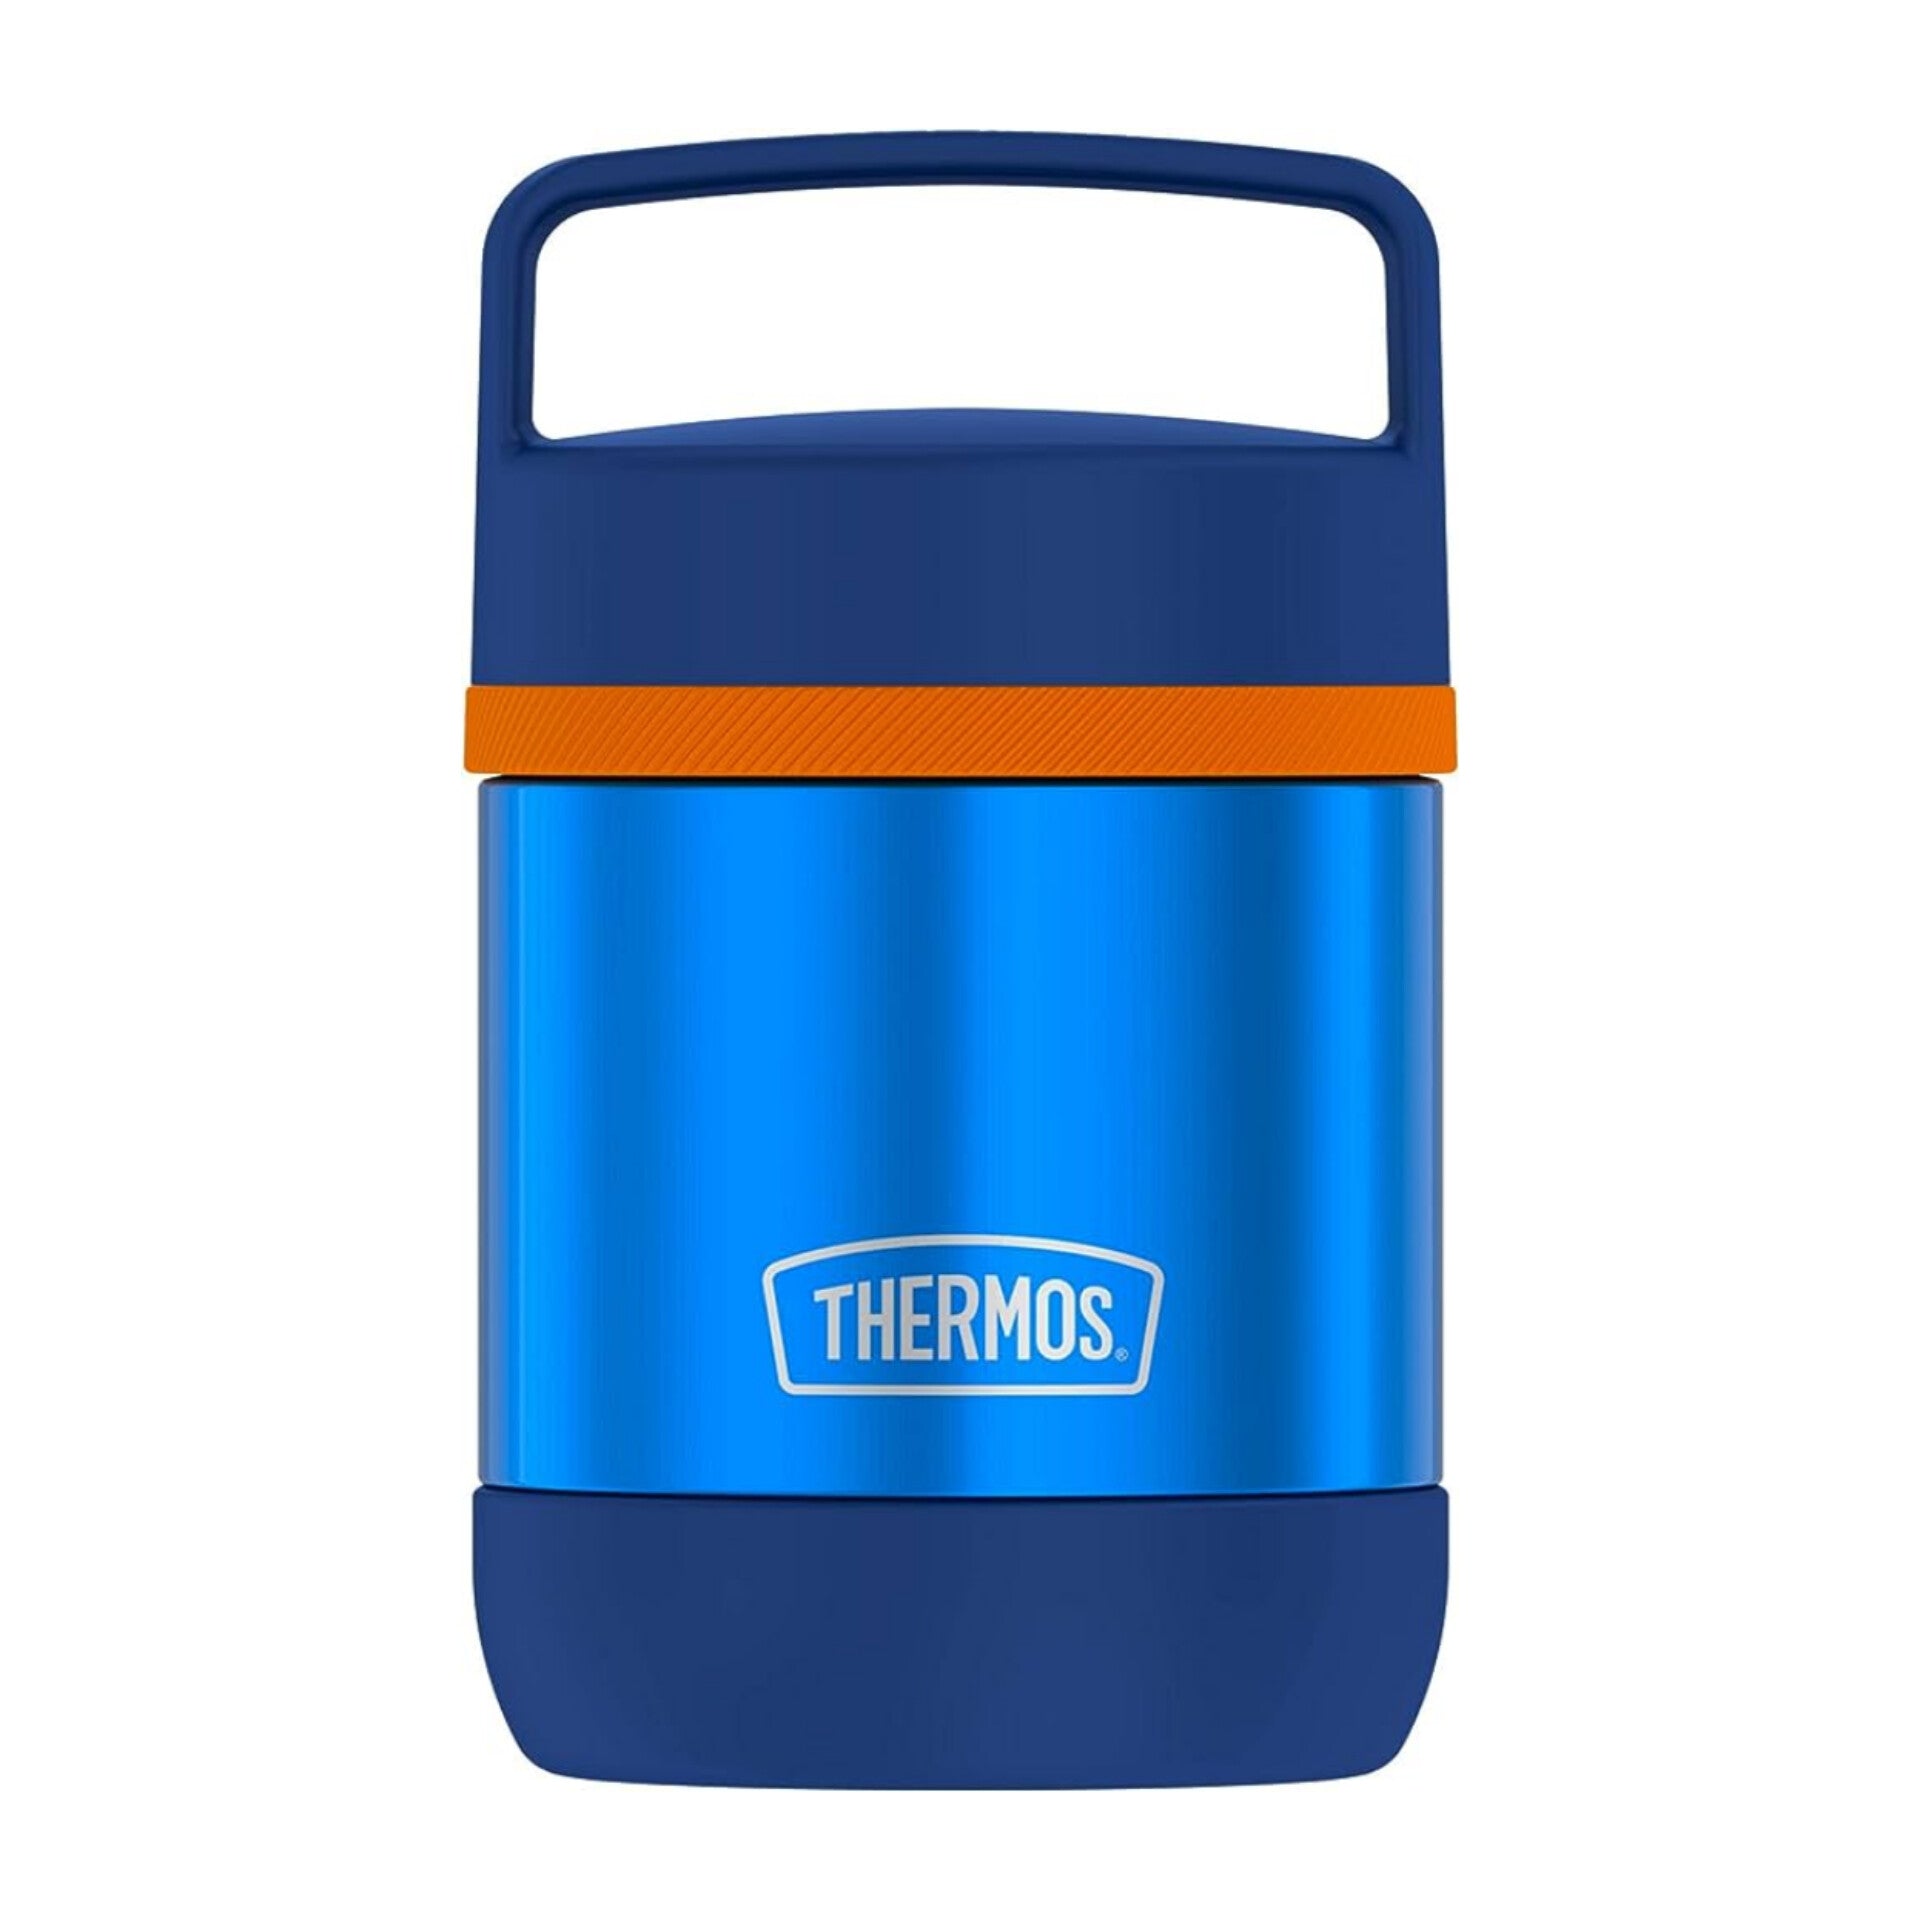 Thermos 10 oz. Kid's Insulated Stainless Steel Food Jar with Handle - Diaper Yard Gh